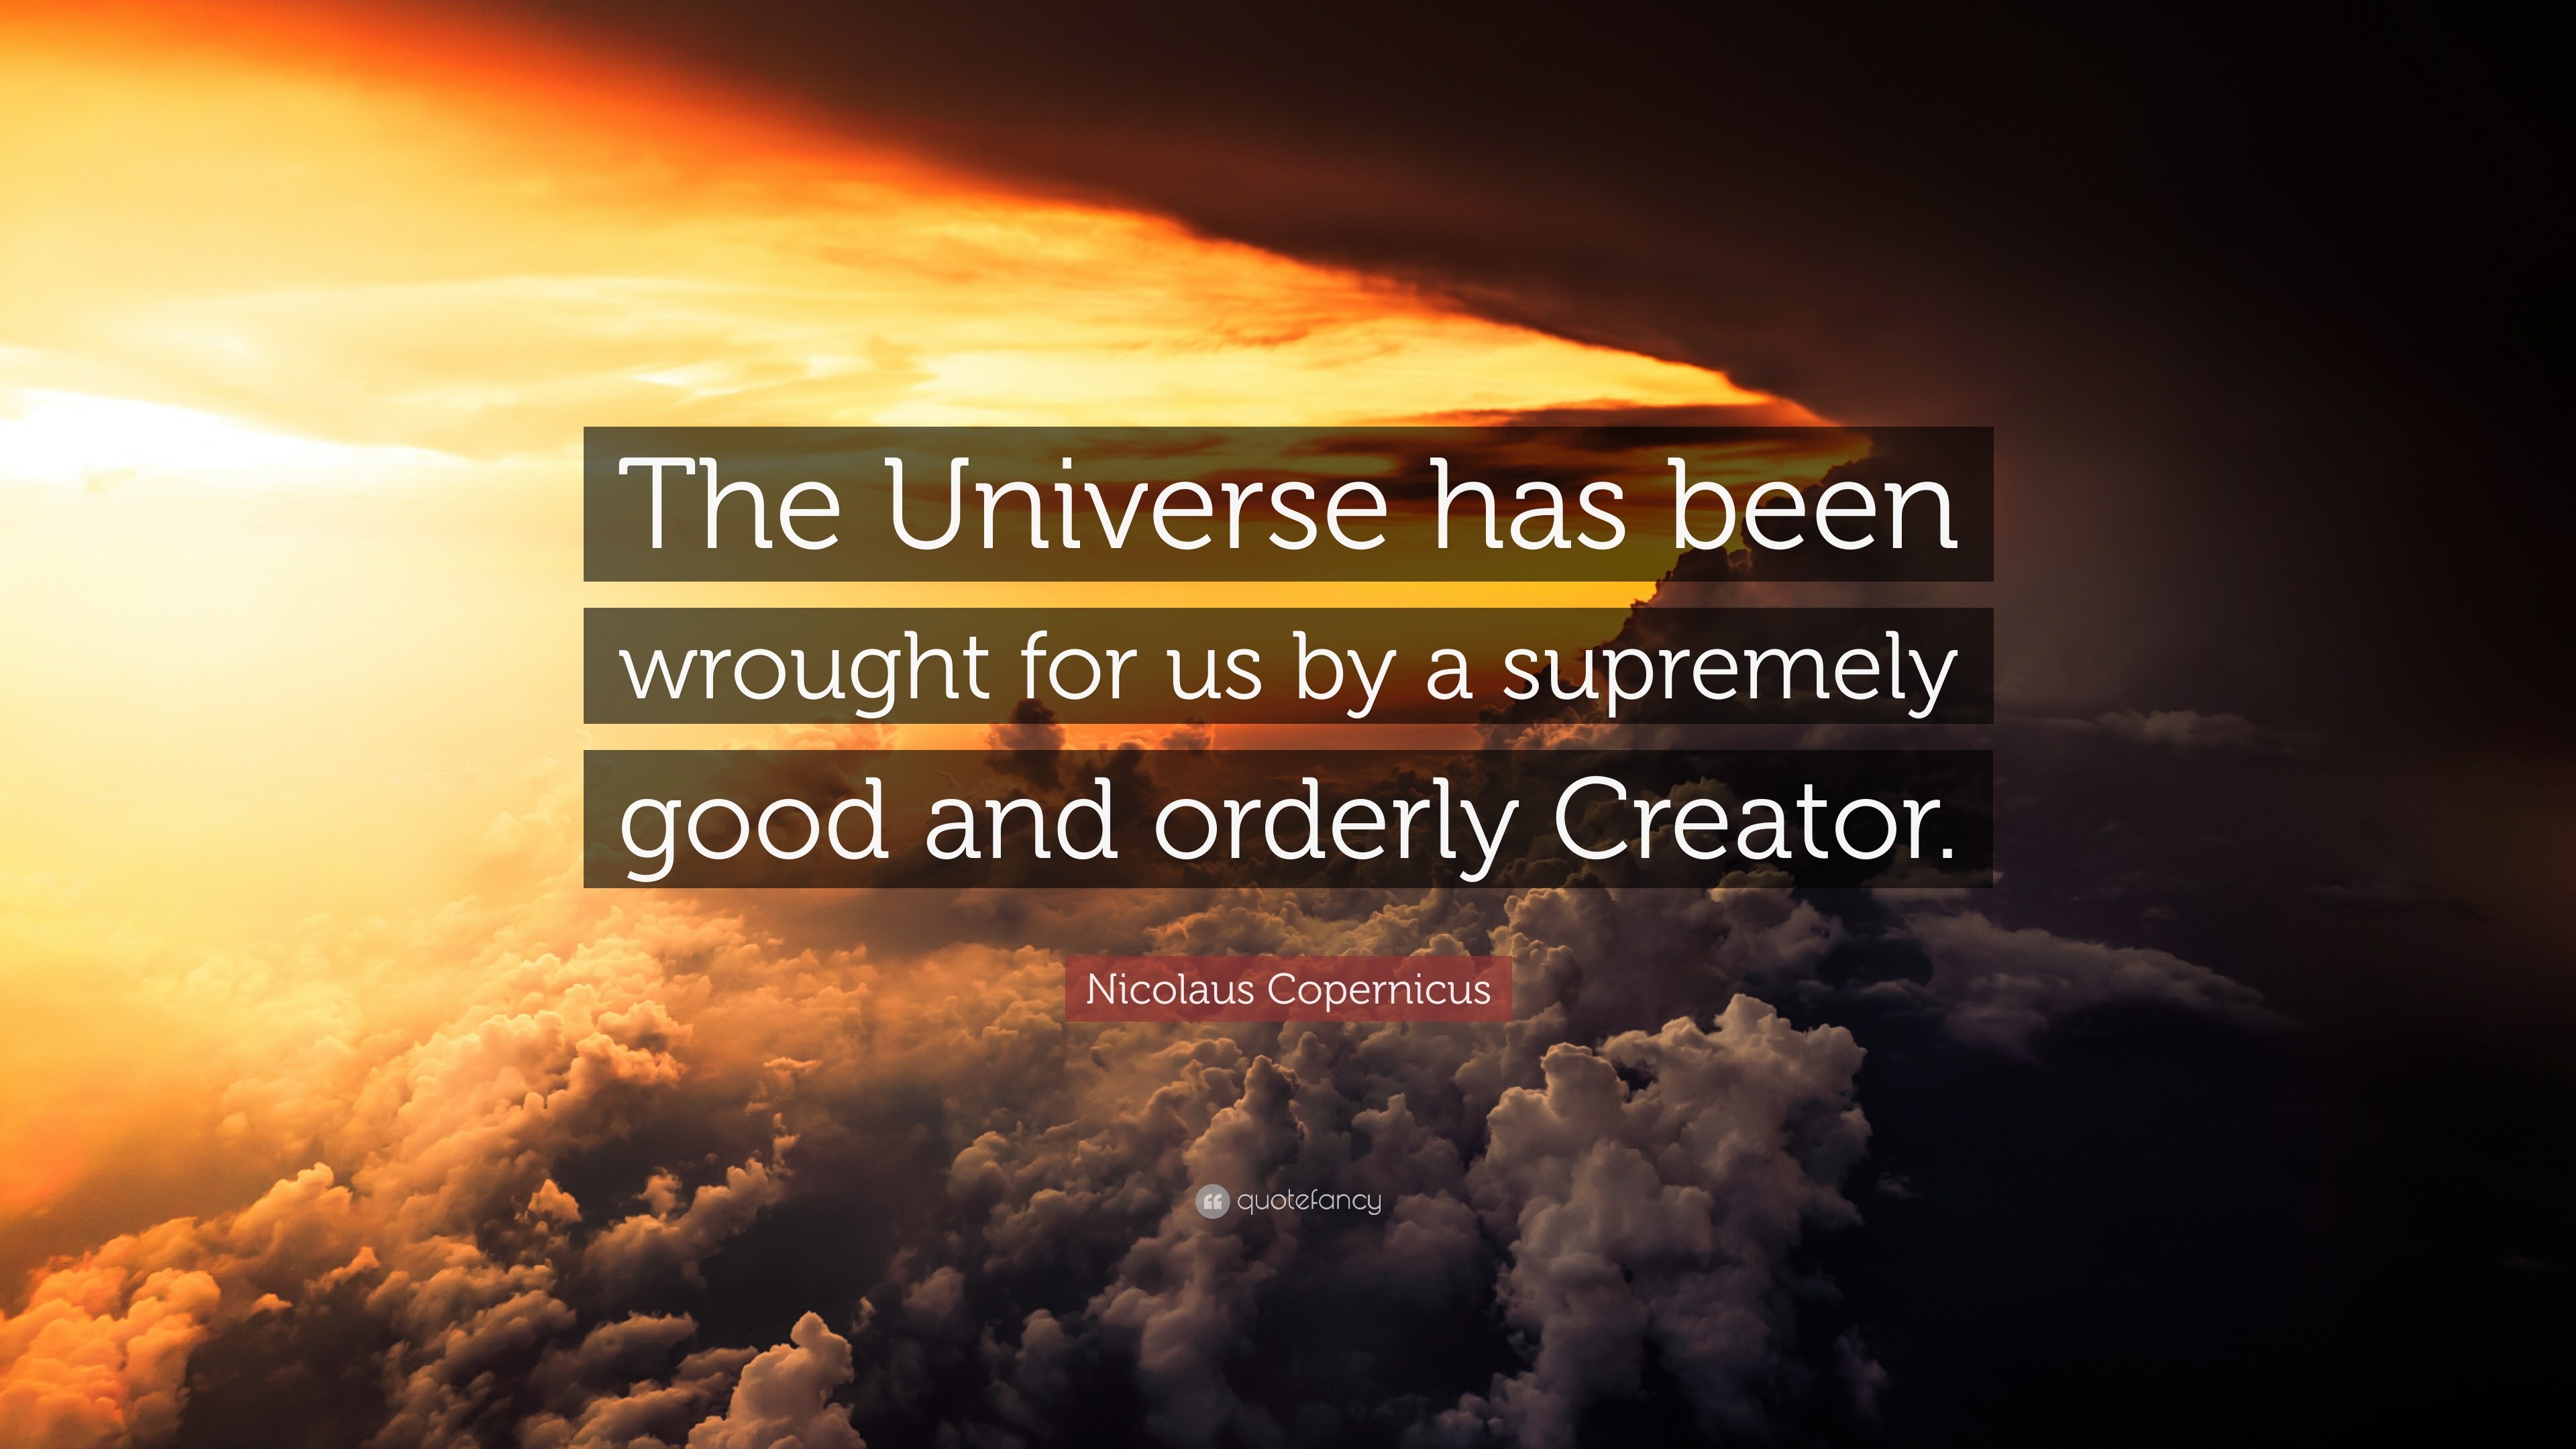 Nicolaus Copernicus Quote: “The Universe has been wrought for us by a